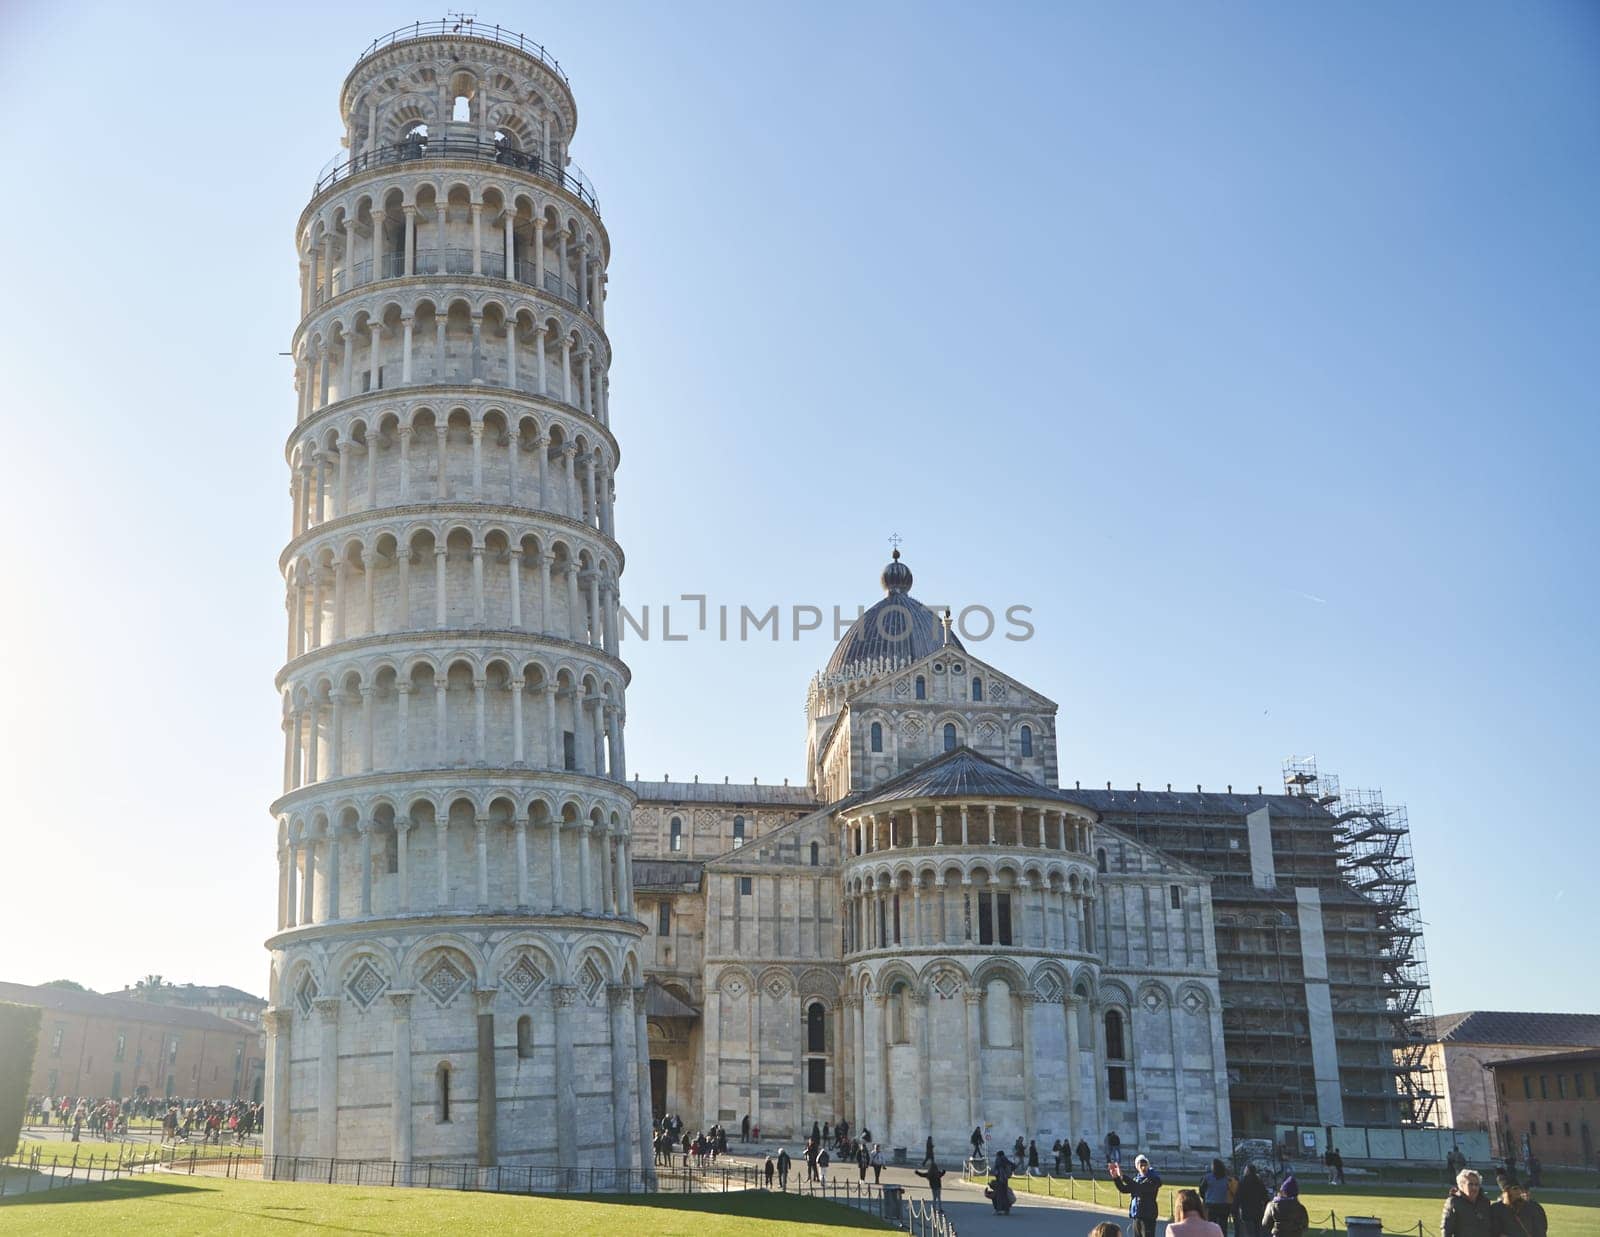 Pisa, Italy - 13.02.2023: View of the Leaning Tower of Pisa on a sunny day in the city of Pisa, Italy by driver-s